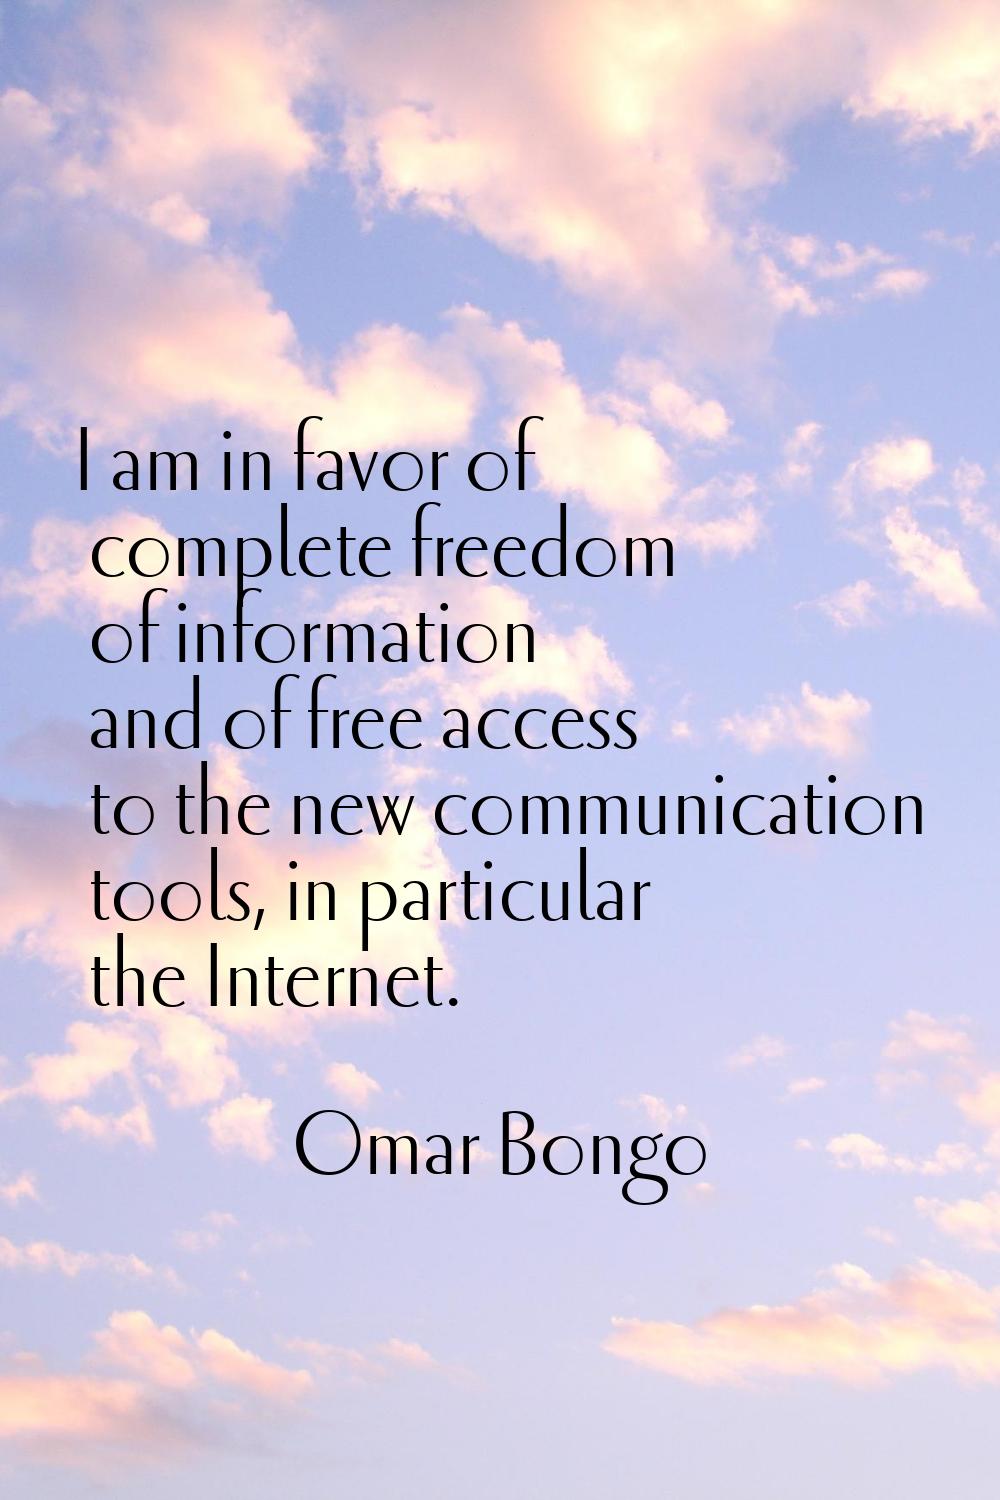 I am in favor of complete freedom of information and of free access to the new communication tools,